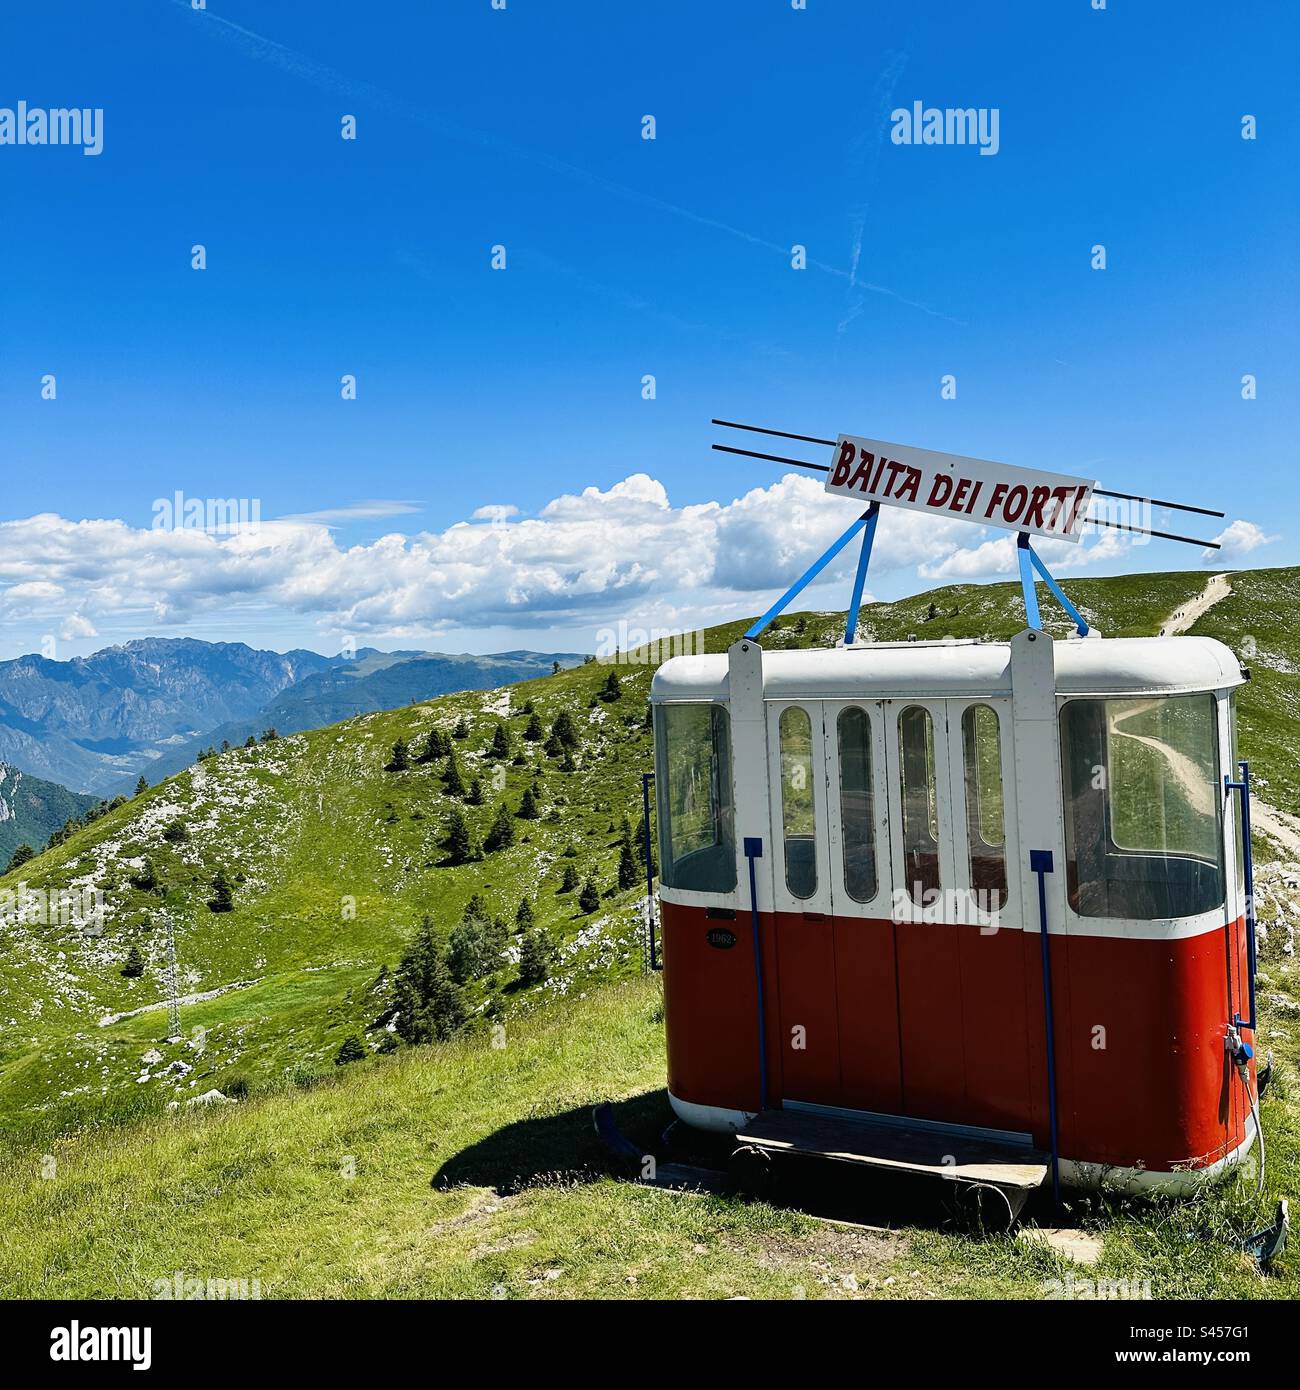 Monte Baldo, Malcesine, Lake Garda, Italy. Old cable car with a beautiful view of the mountains. Stock Photo